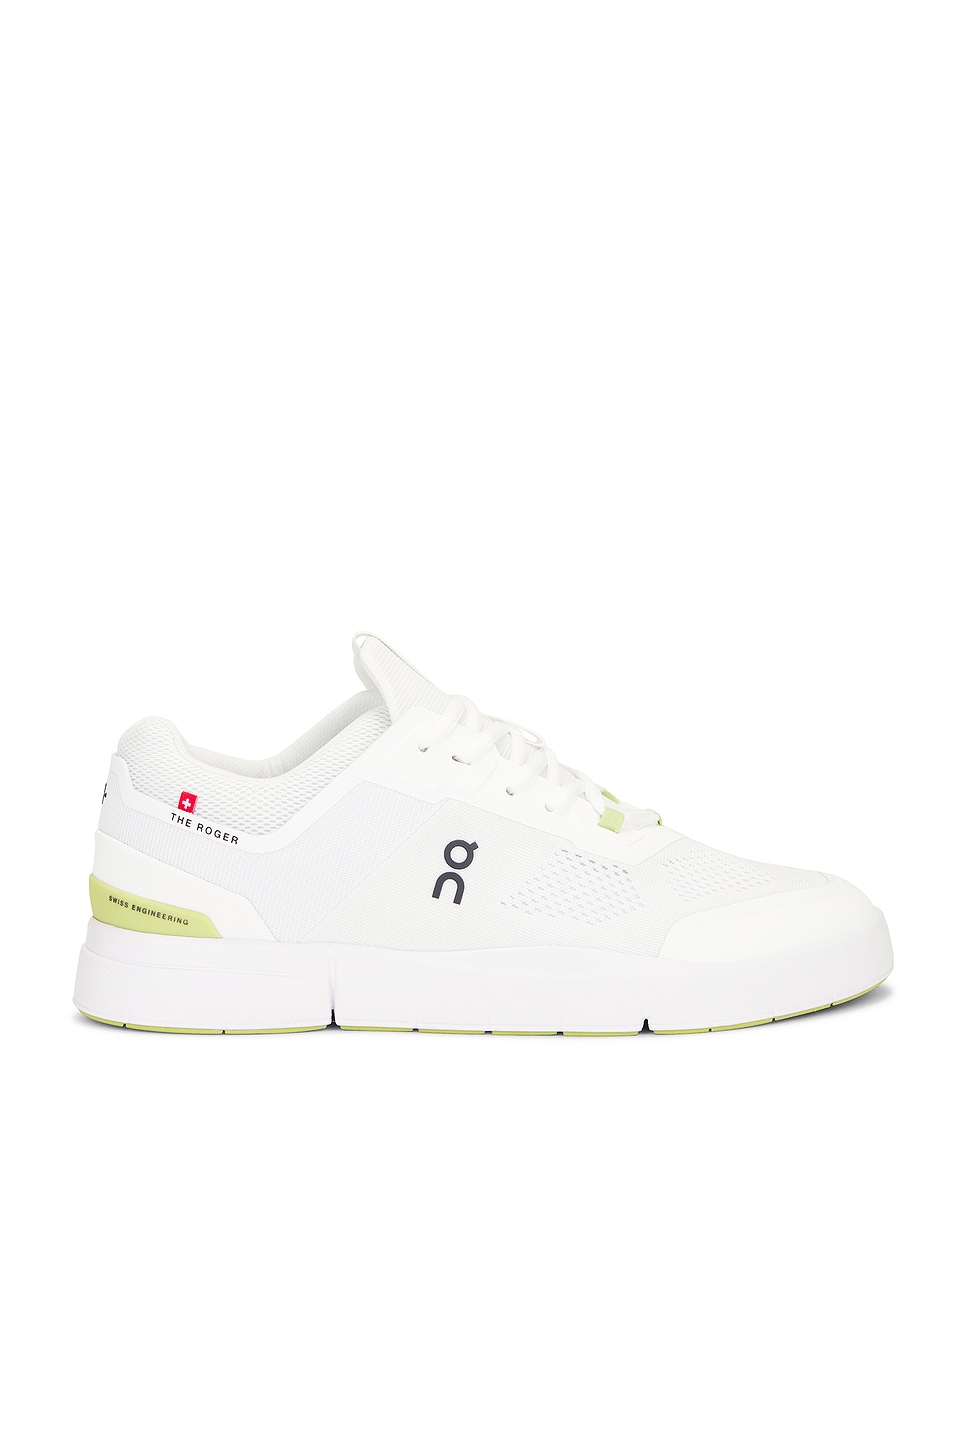 Image 1 of On The Roger Spin Sneaker in Undyed & Zest